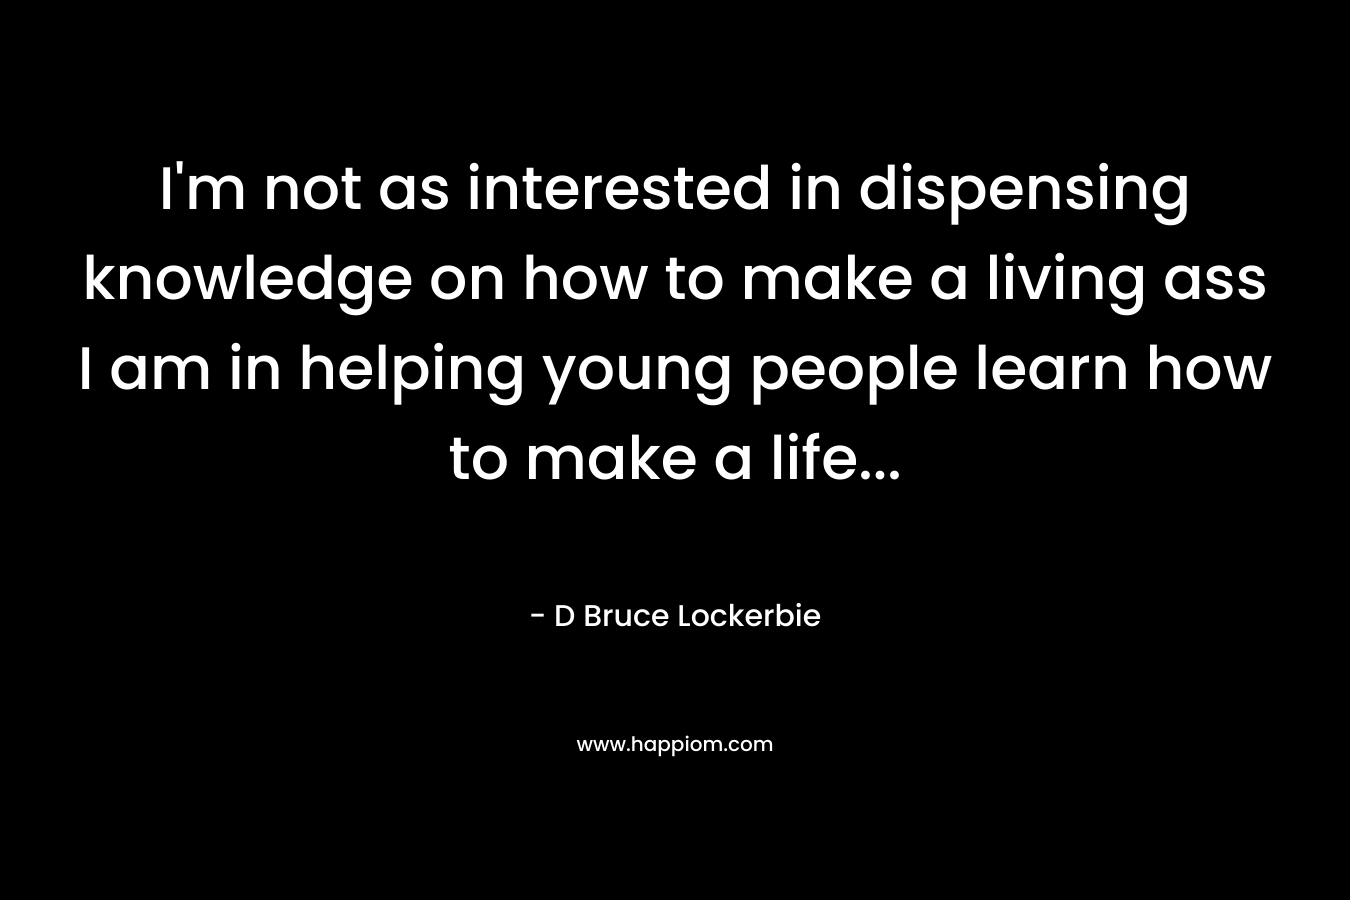 I’m not as interested in dispensing knowledge on how to make a living ass I am in helping young people learn how to make a life… – D Bruce Lockerbie